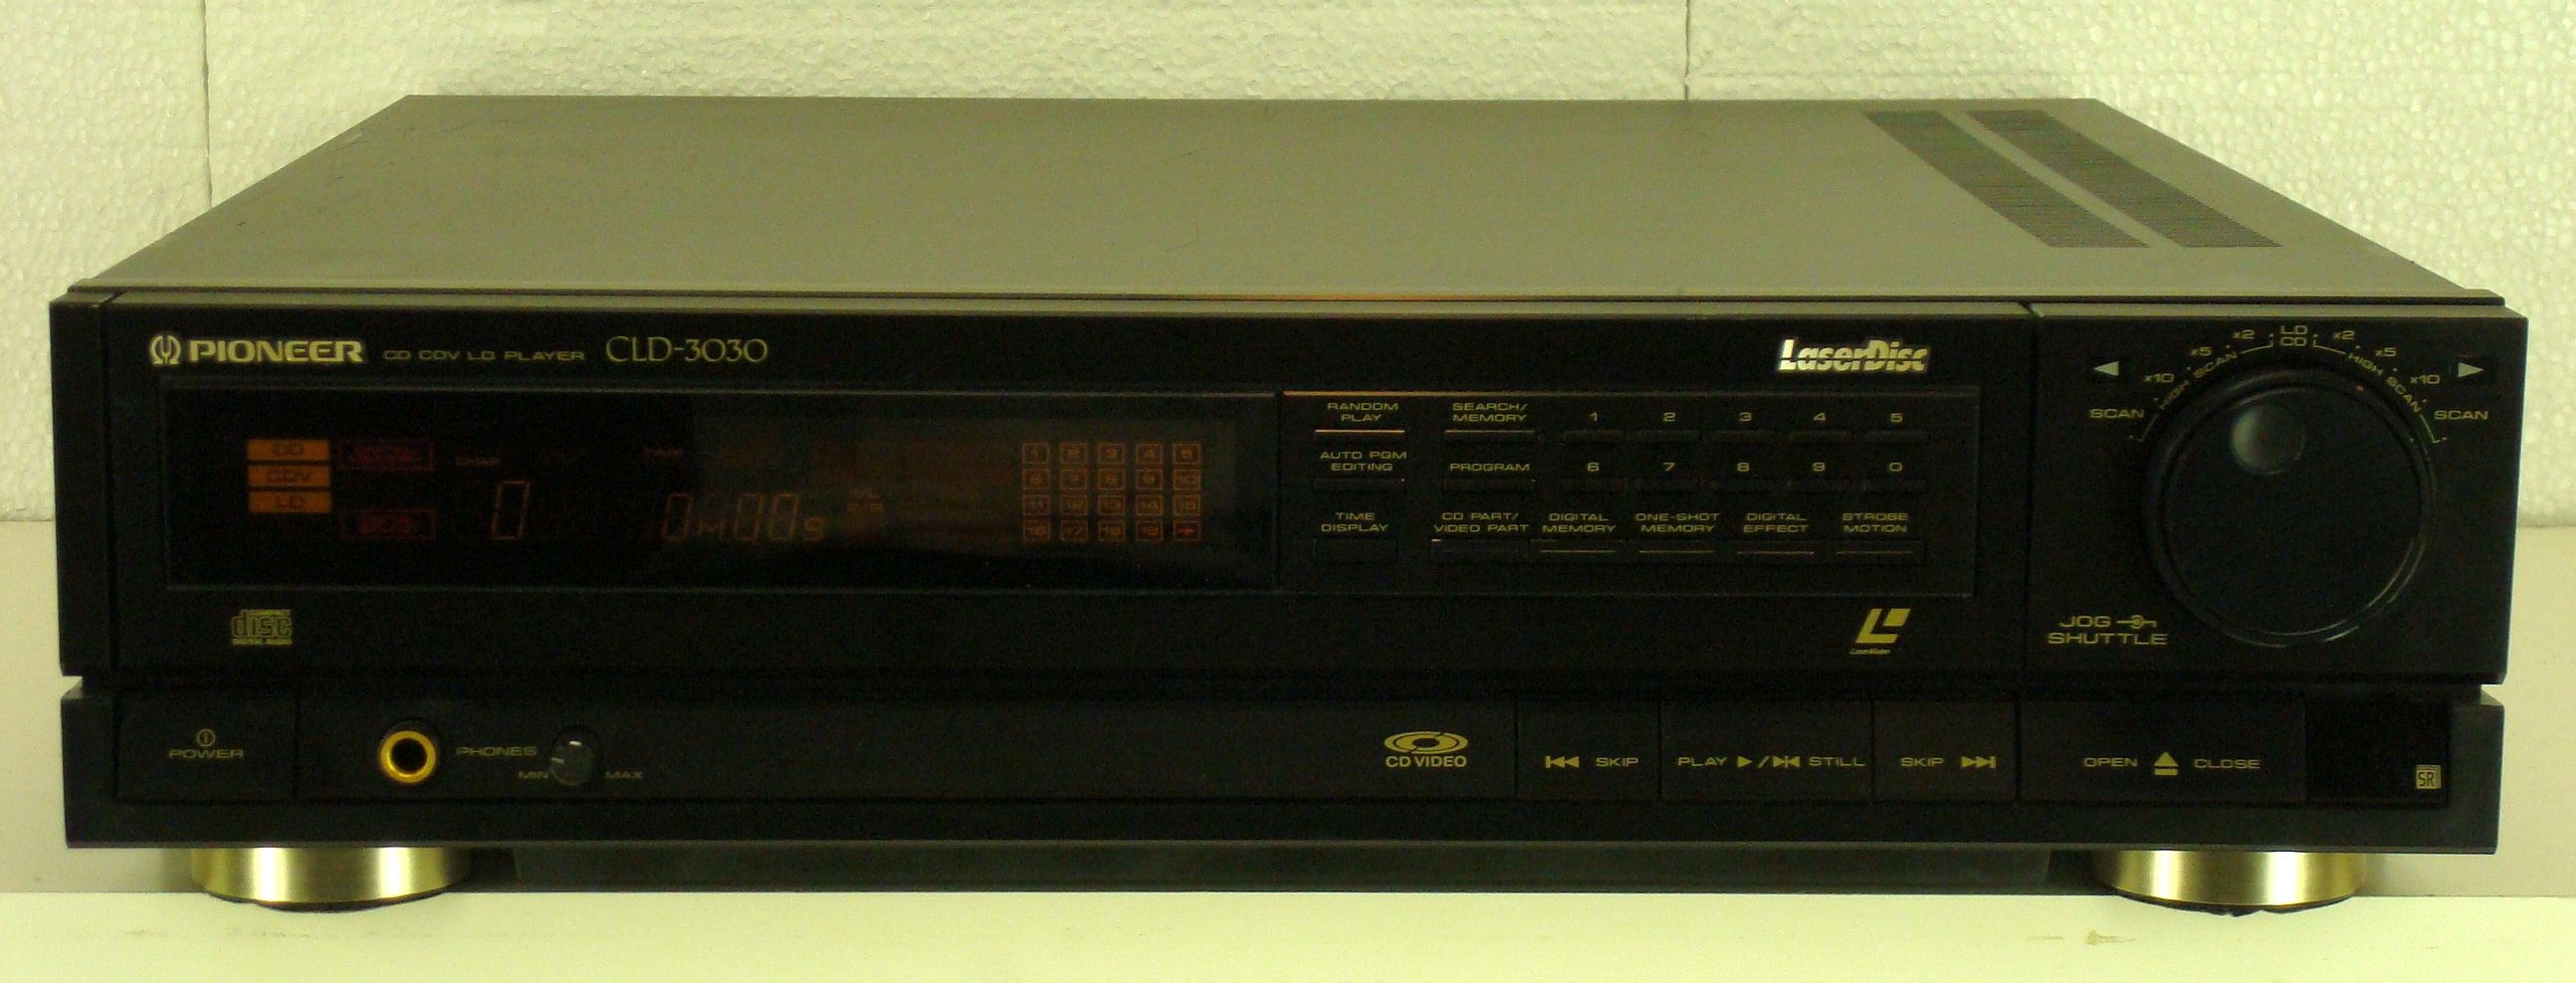 Pioneer CLD-3030 Laser Disk Player